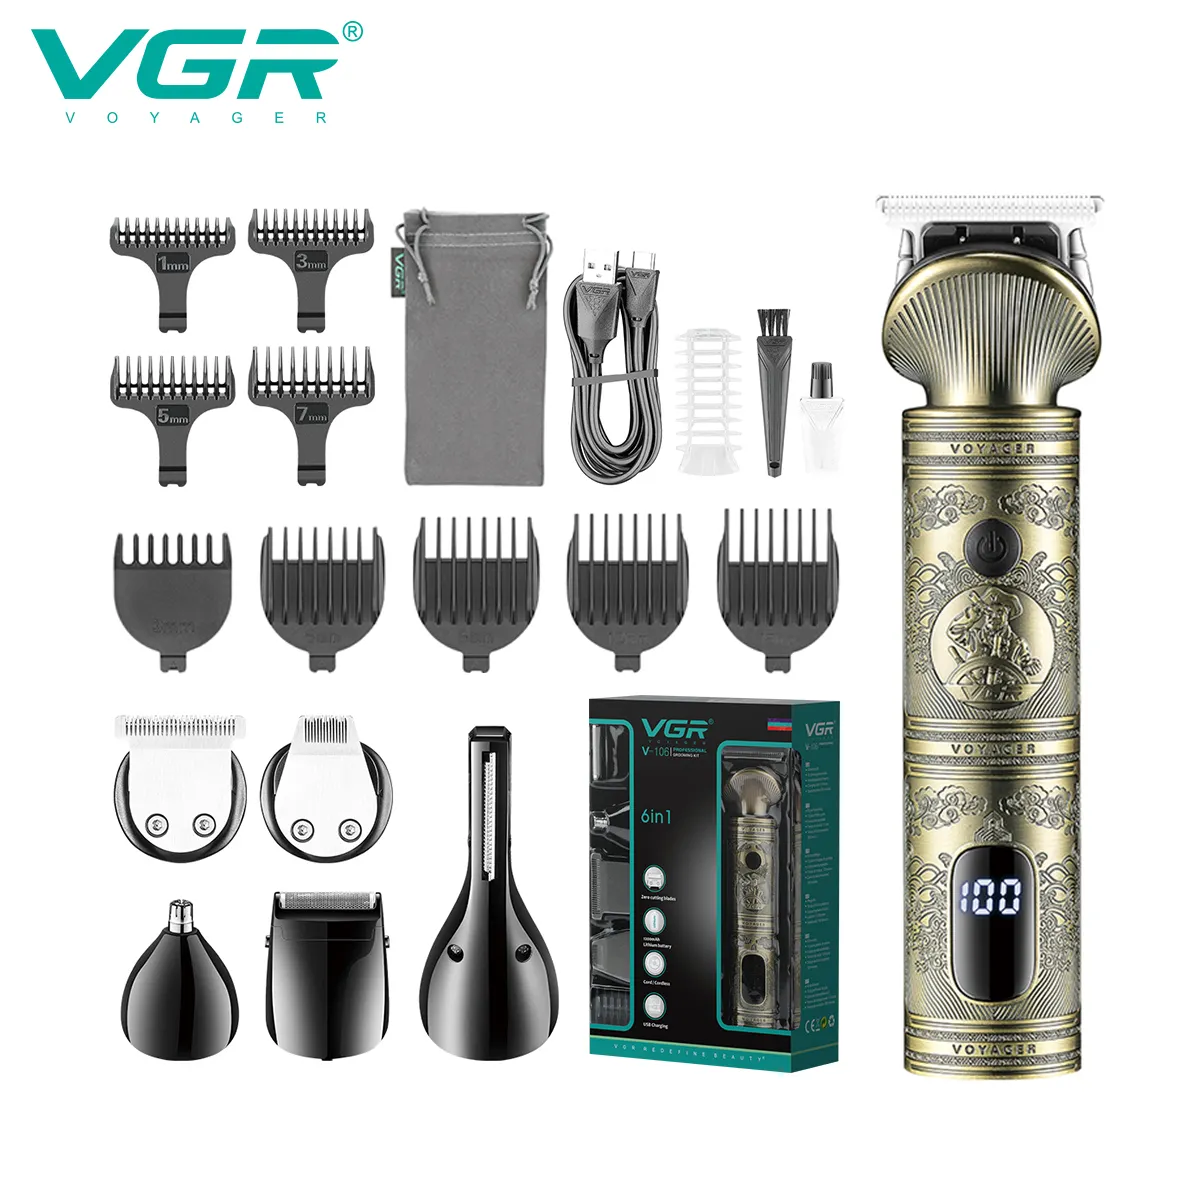 VGR V-106 6 in 1 Grooming Kit Rechargeable Body Trimmer Professional Electric Shaver Cordless Hair Trimmer Set for Men